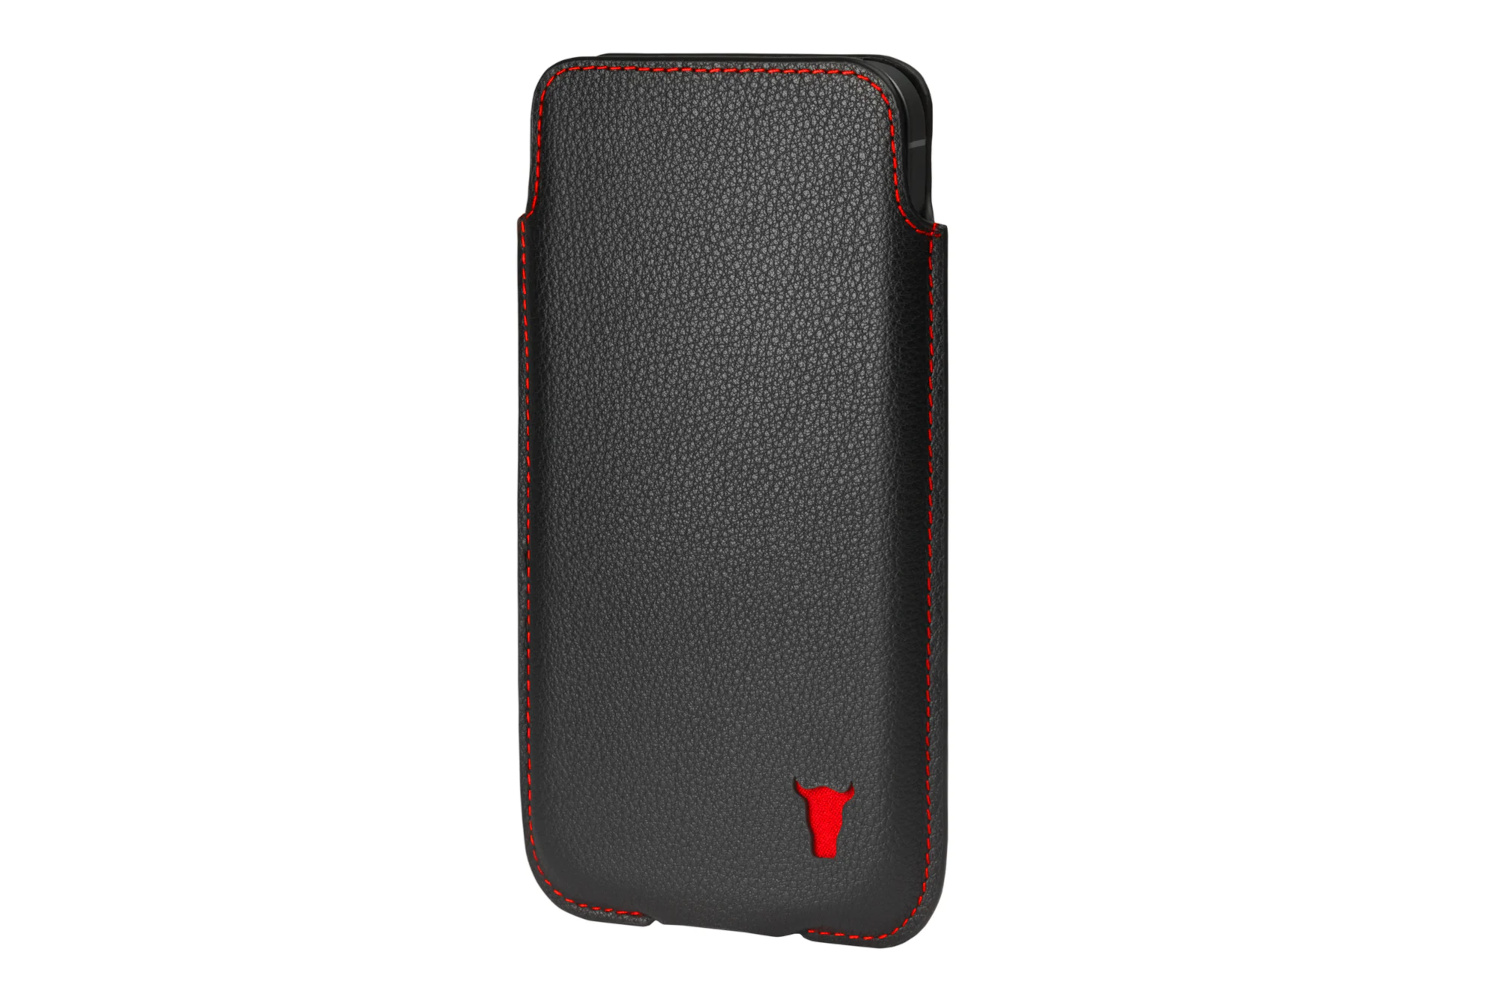 Torro iPhone 14 Pro Max Leather Folio Case has a MagSafe